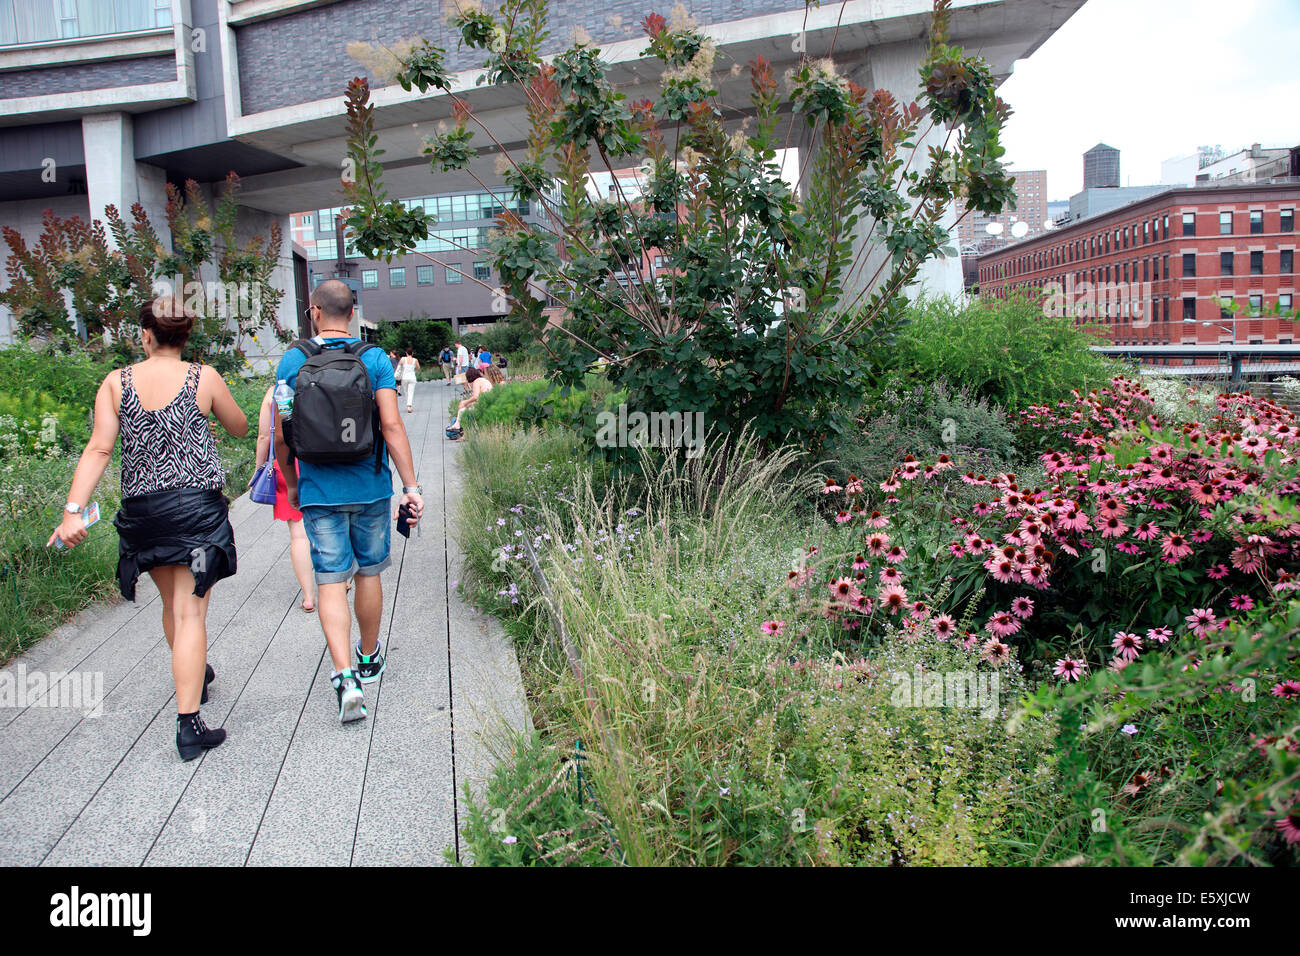 The High Line, a mile long linear park on what was the elevated railway known as the West Side Line. Stock Photo